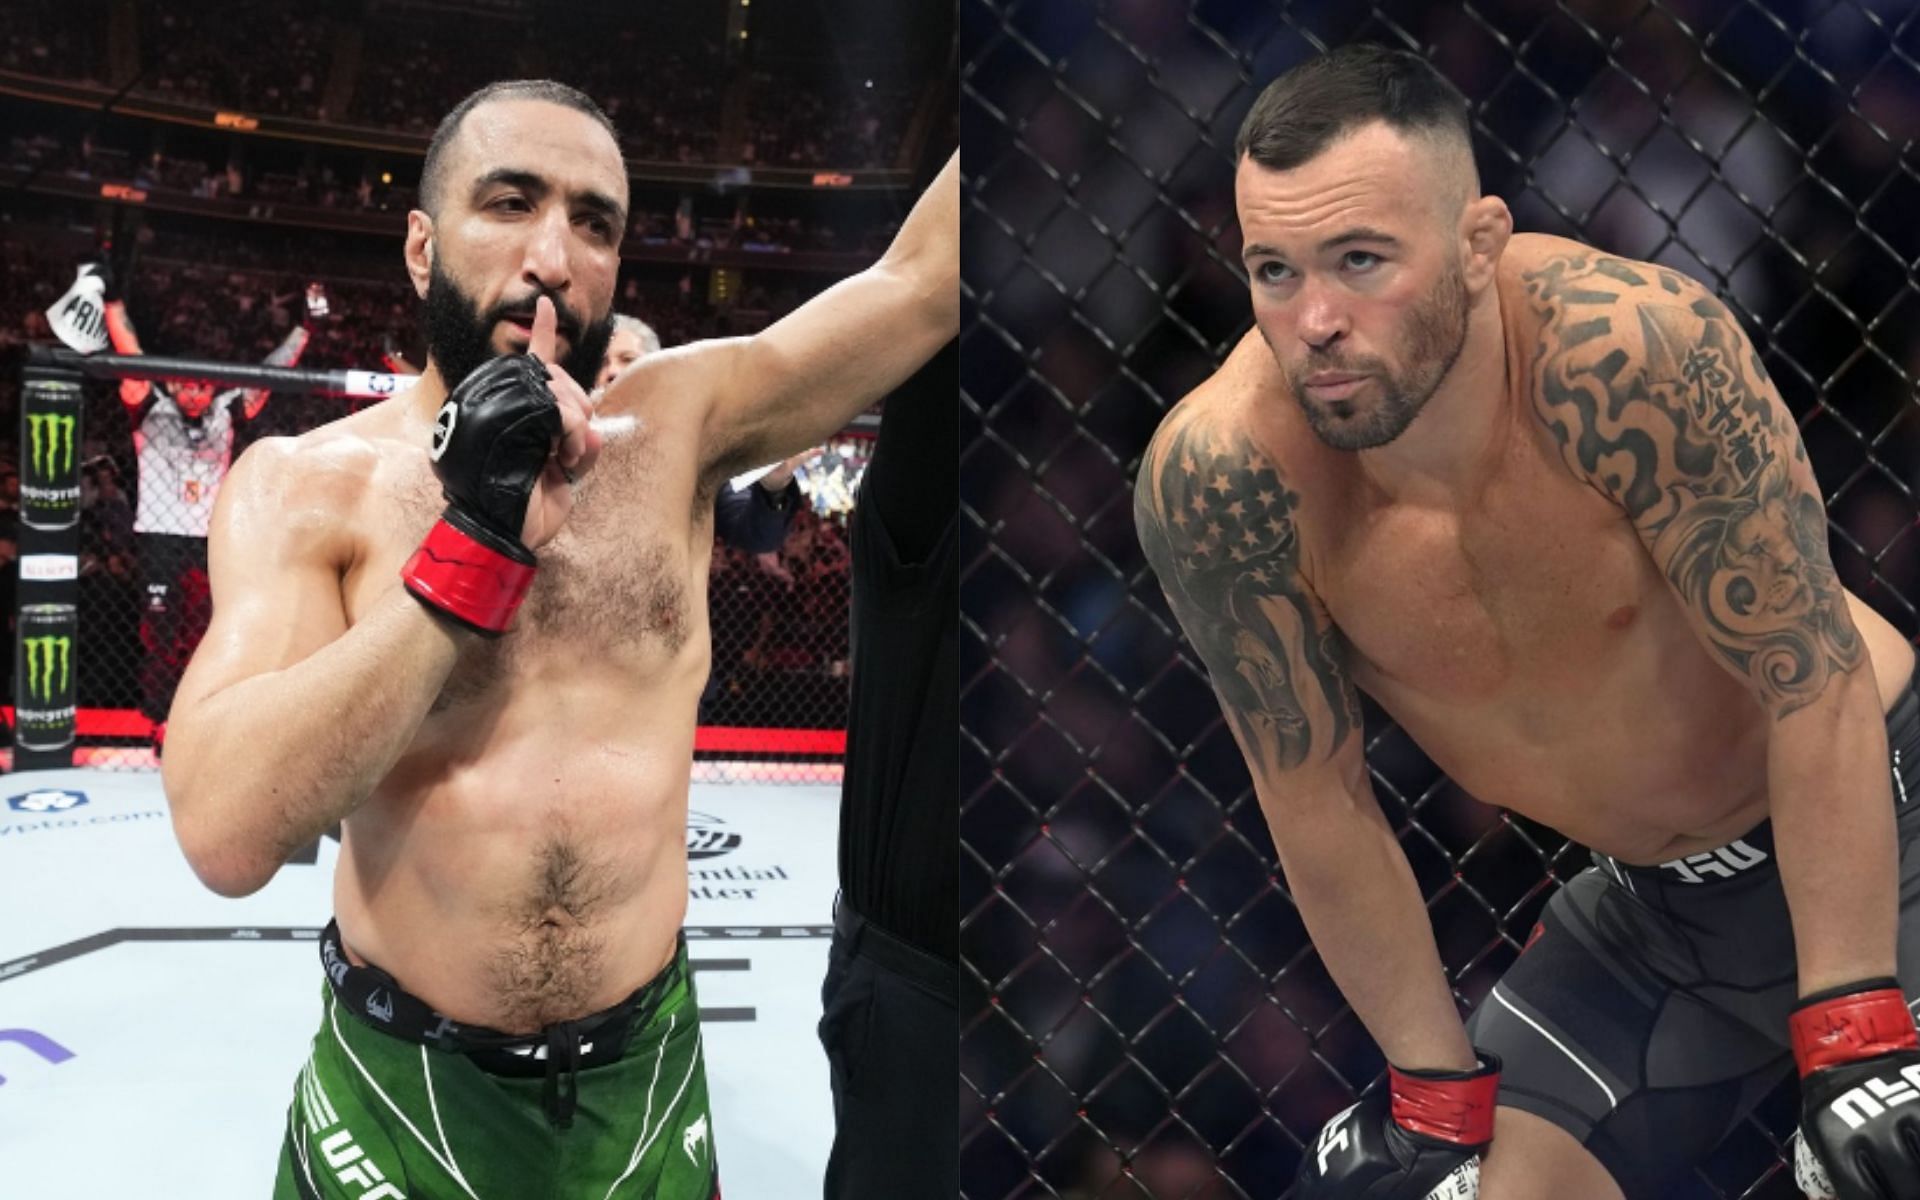 Belal Muhammad (Left) and Colby Covington (Right) [Images via: @ufc on Instagram]